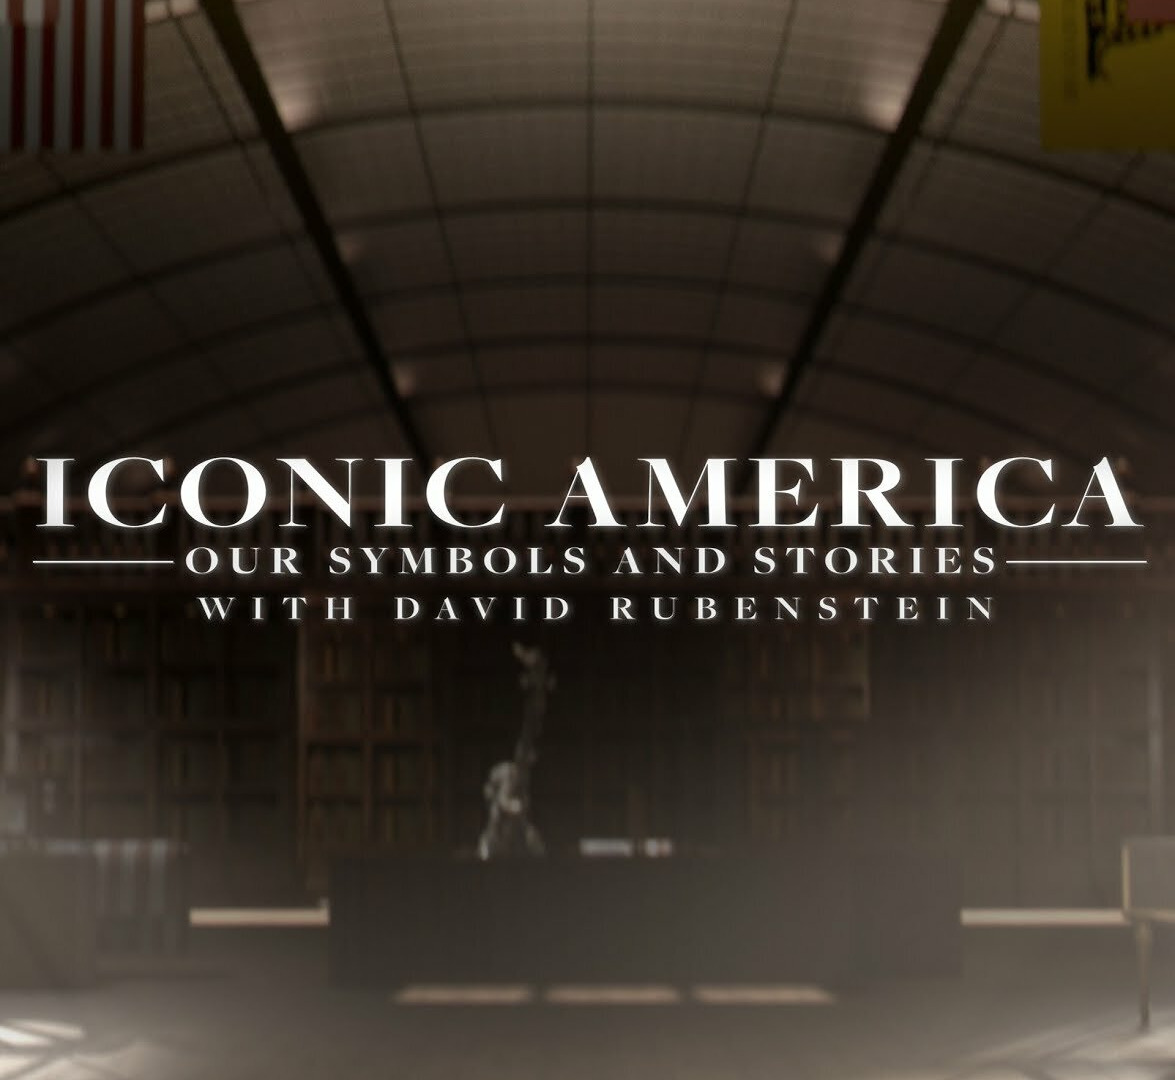 Show Iconic America: Our Symbols and Stories with David Rubenstein